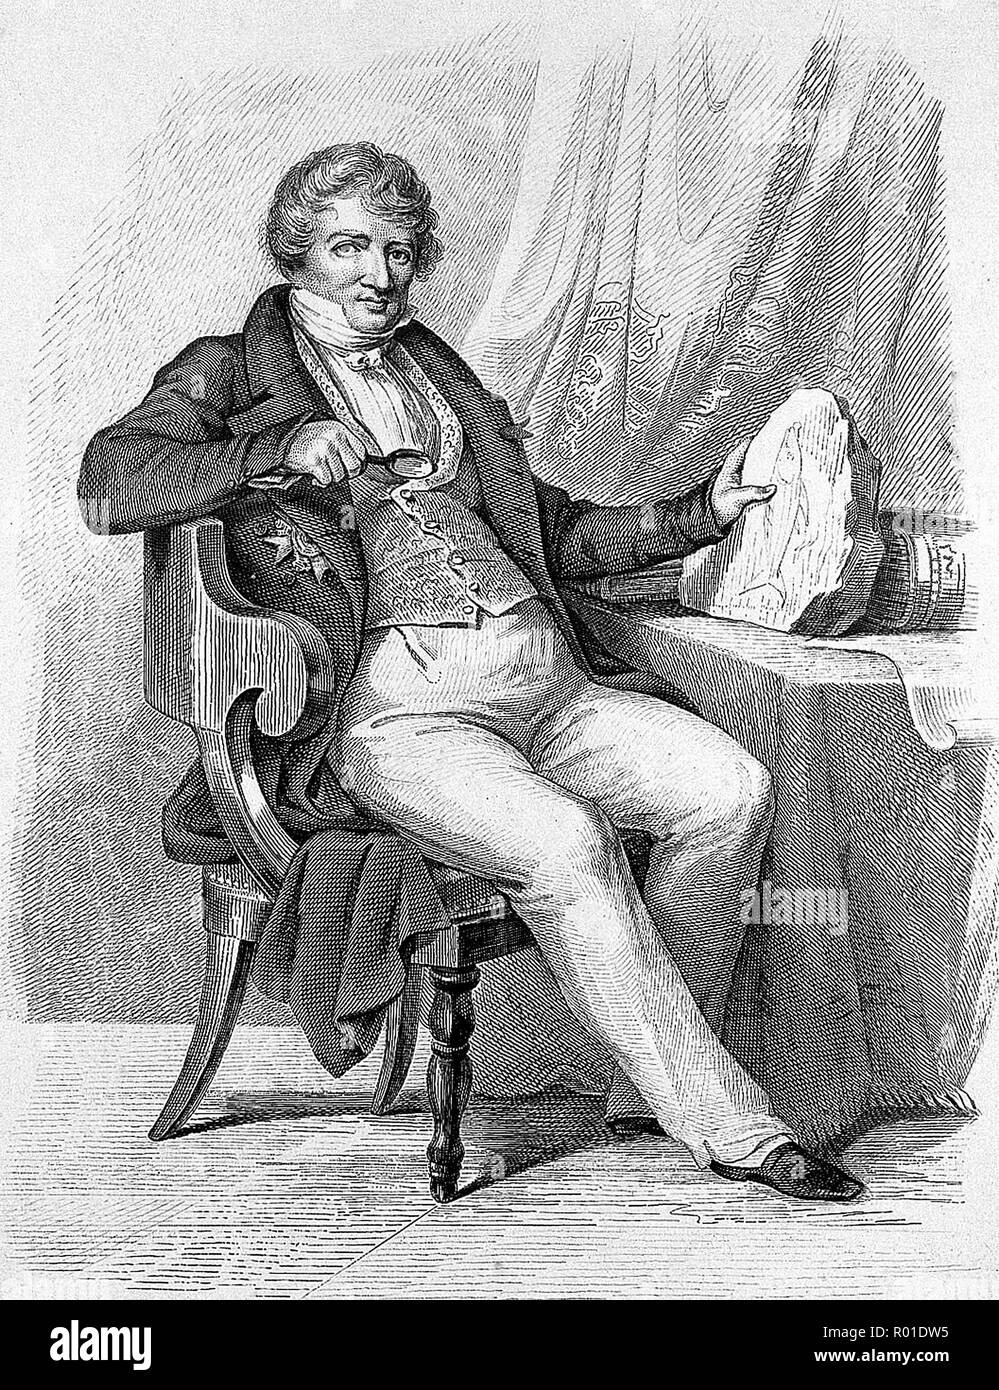 Baron Georges Cuvier (1769 - 1832) Jean Léopold Nicolas Frédéric, Baron Cuvier, known as Georges Cuvier, French naturalist and zoologist, sometimes referred to as the 'founding father of paleontology' Baron Georges Cuvier, holding a fish fossil Stock Photo